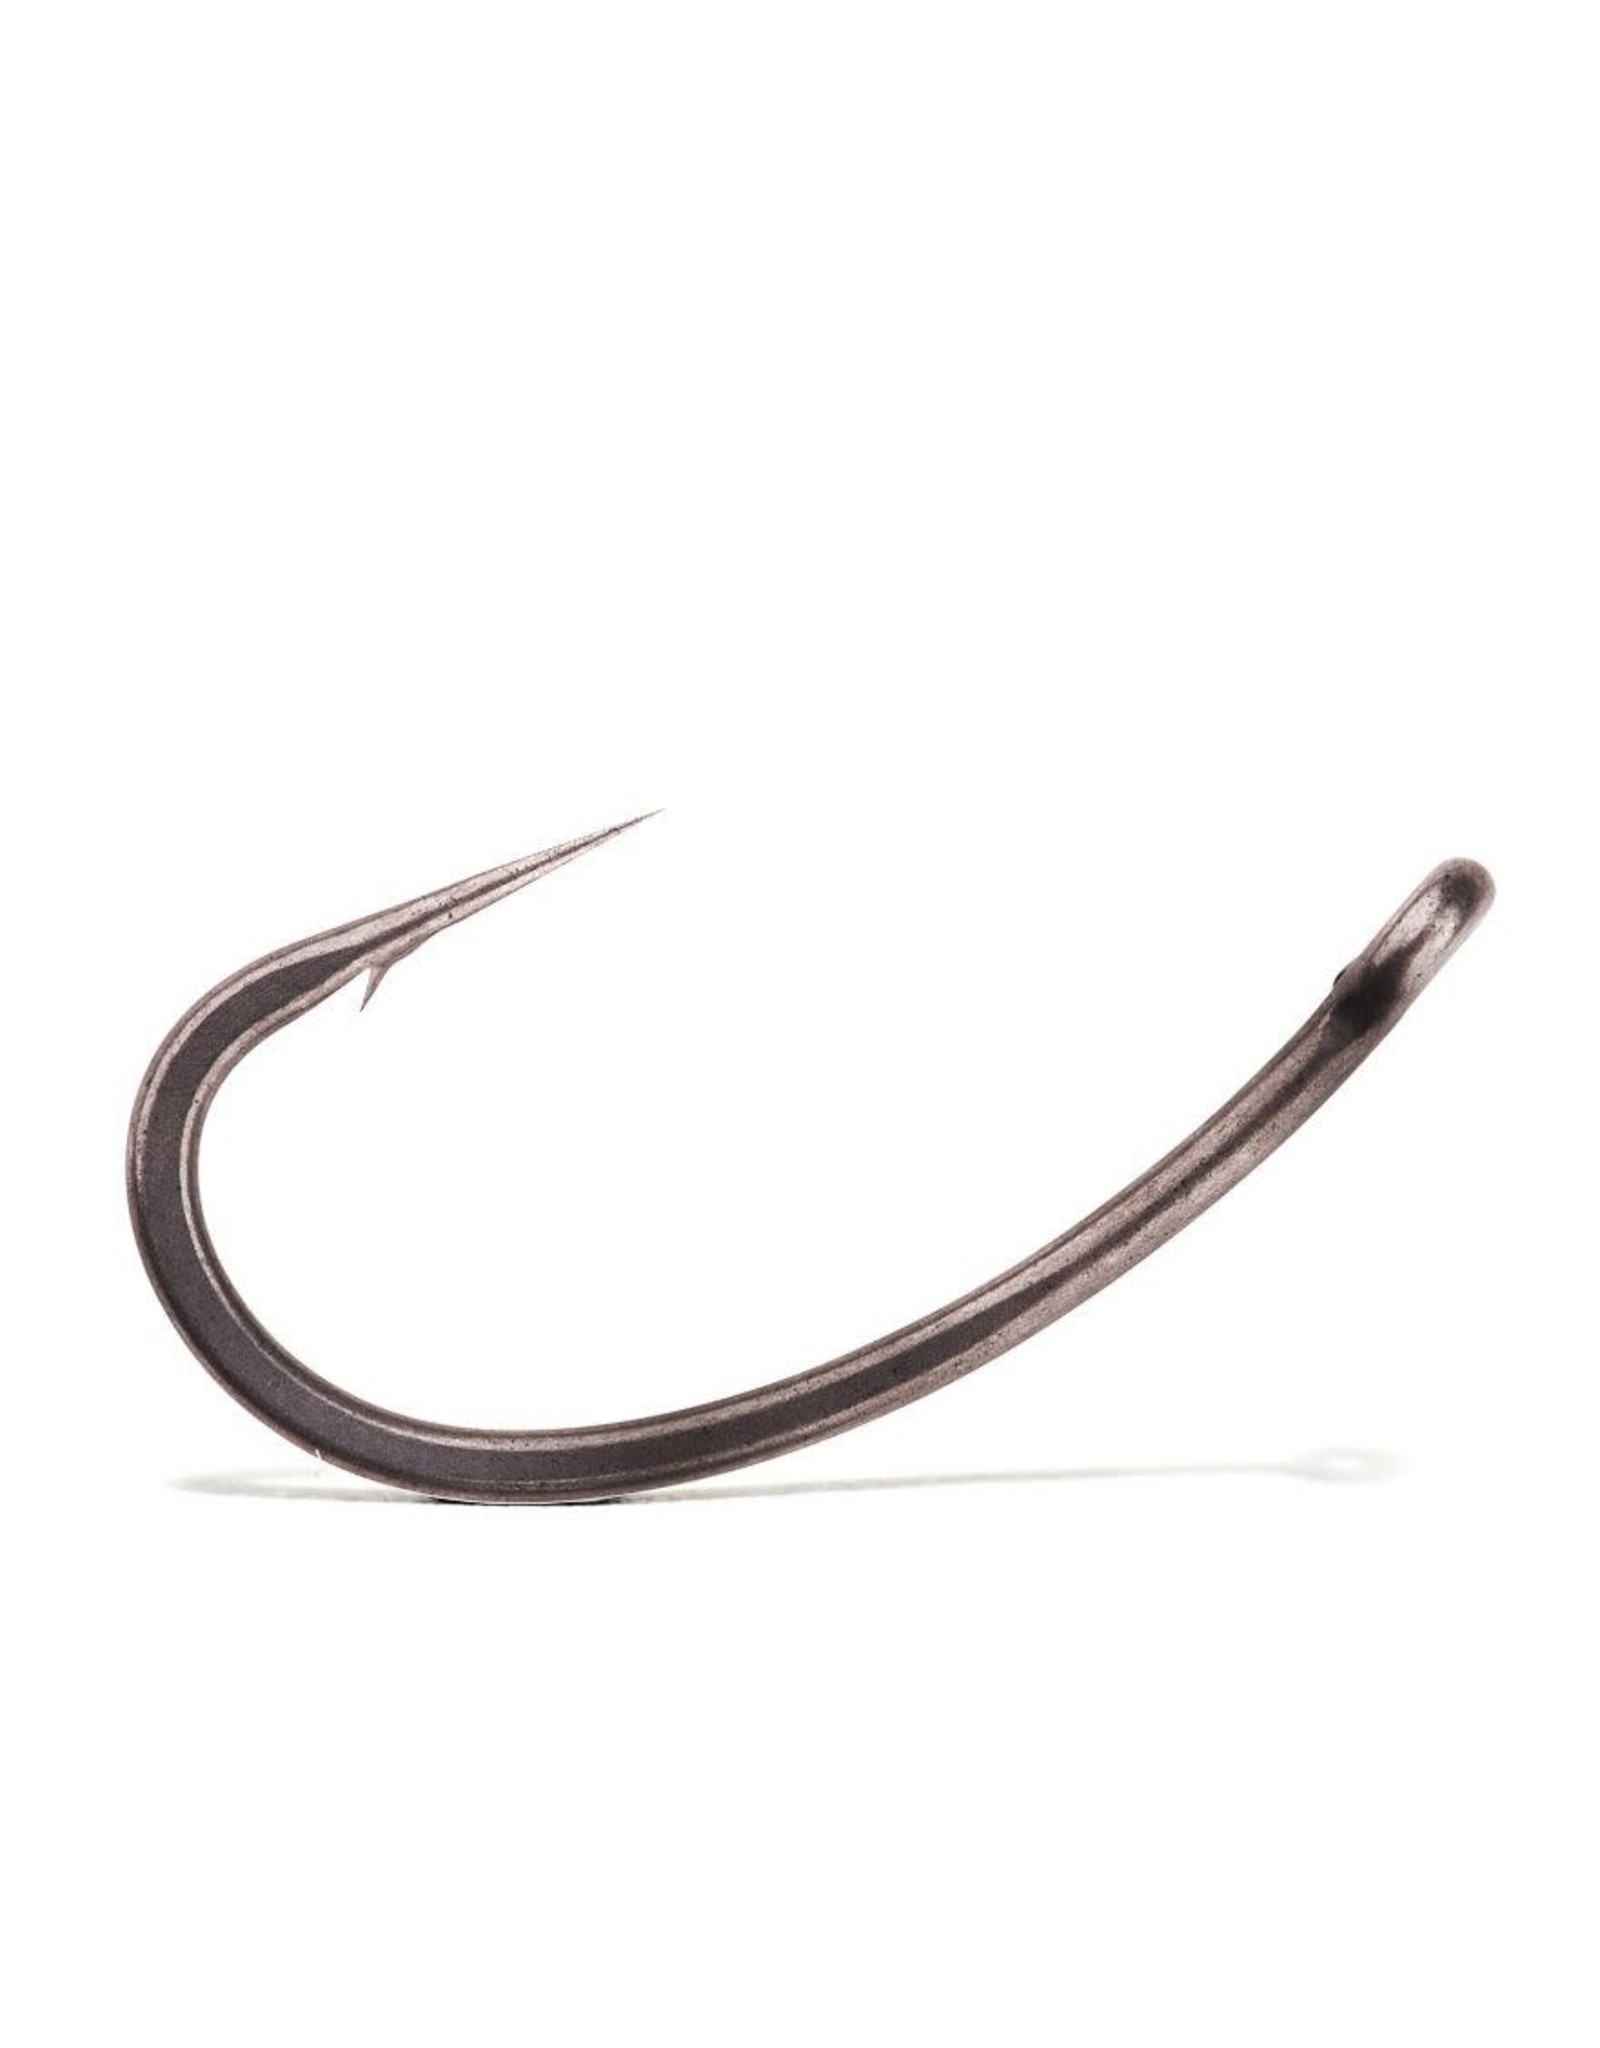 Pole position STRONGBOW HOOKS PTFE 10ST